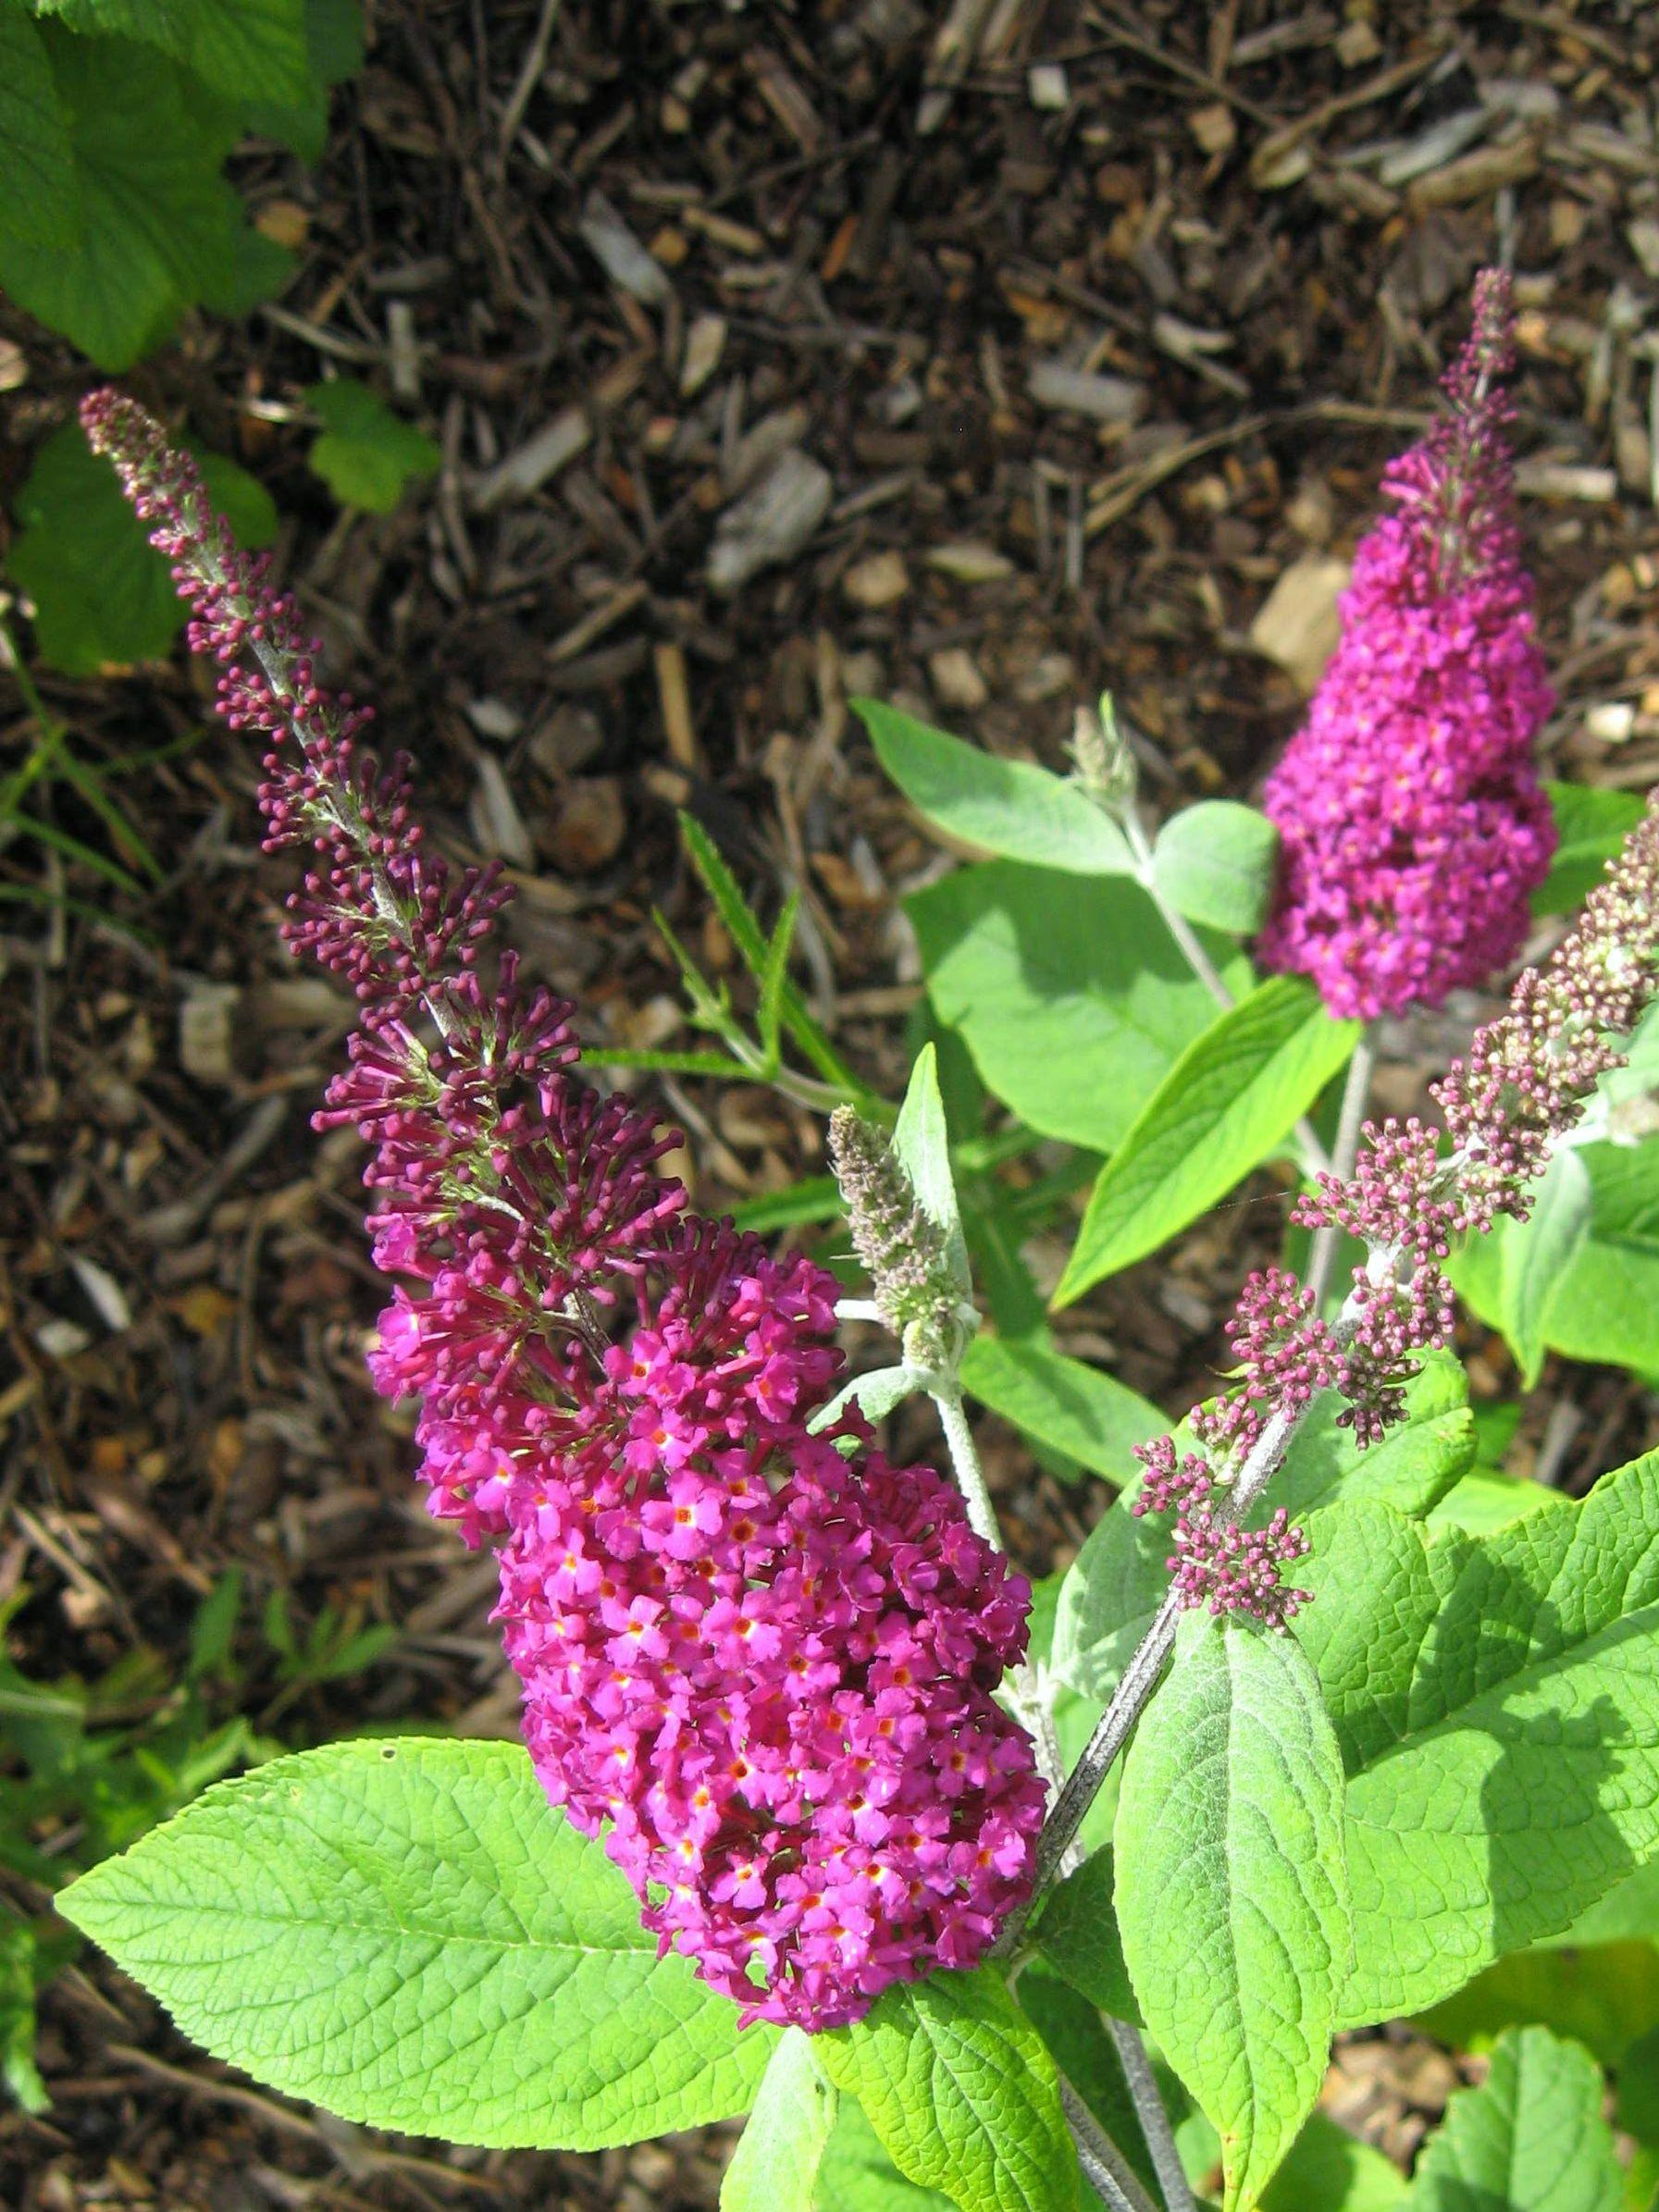 Magenta flowers with buds, orange-white center,  green leaves, green-white stems and branches. 